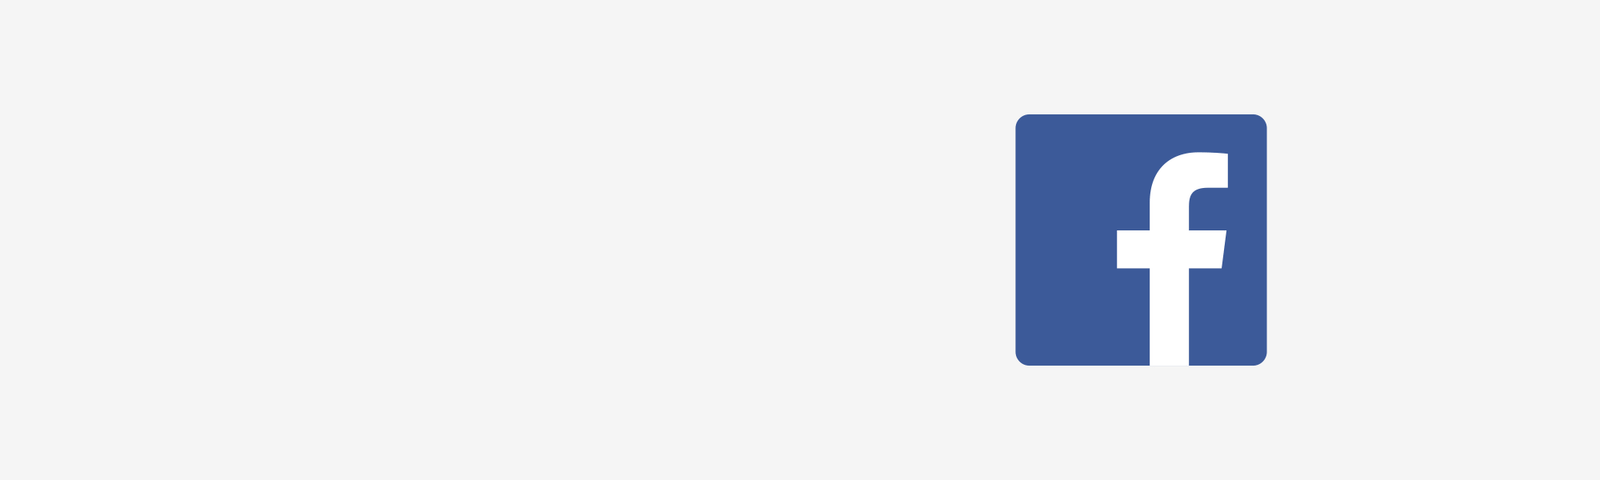 10 steps to make your Facebook profile business friendly